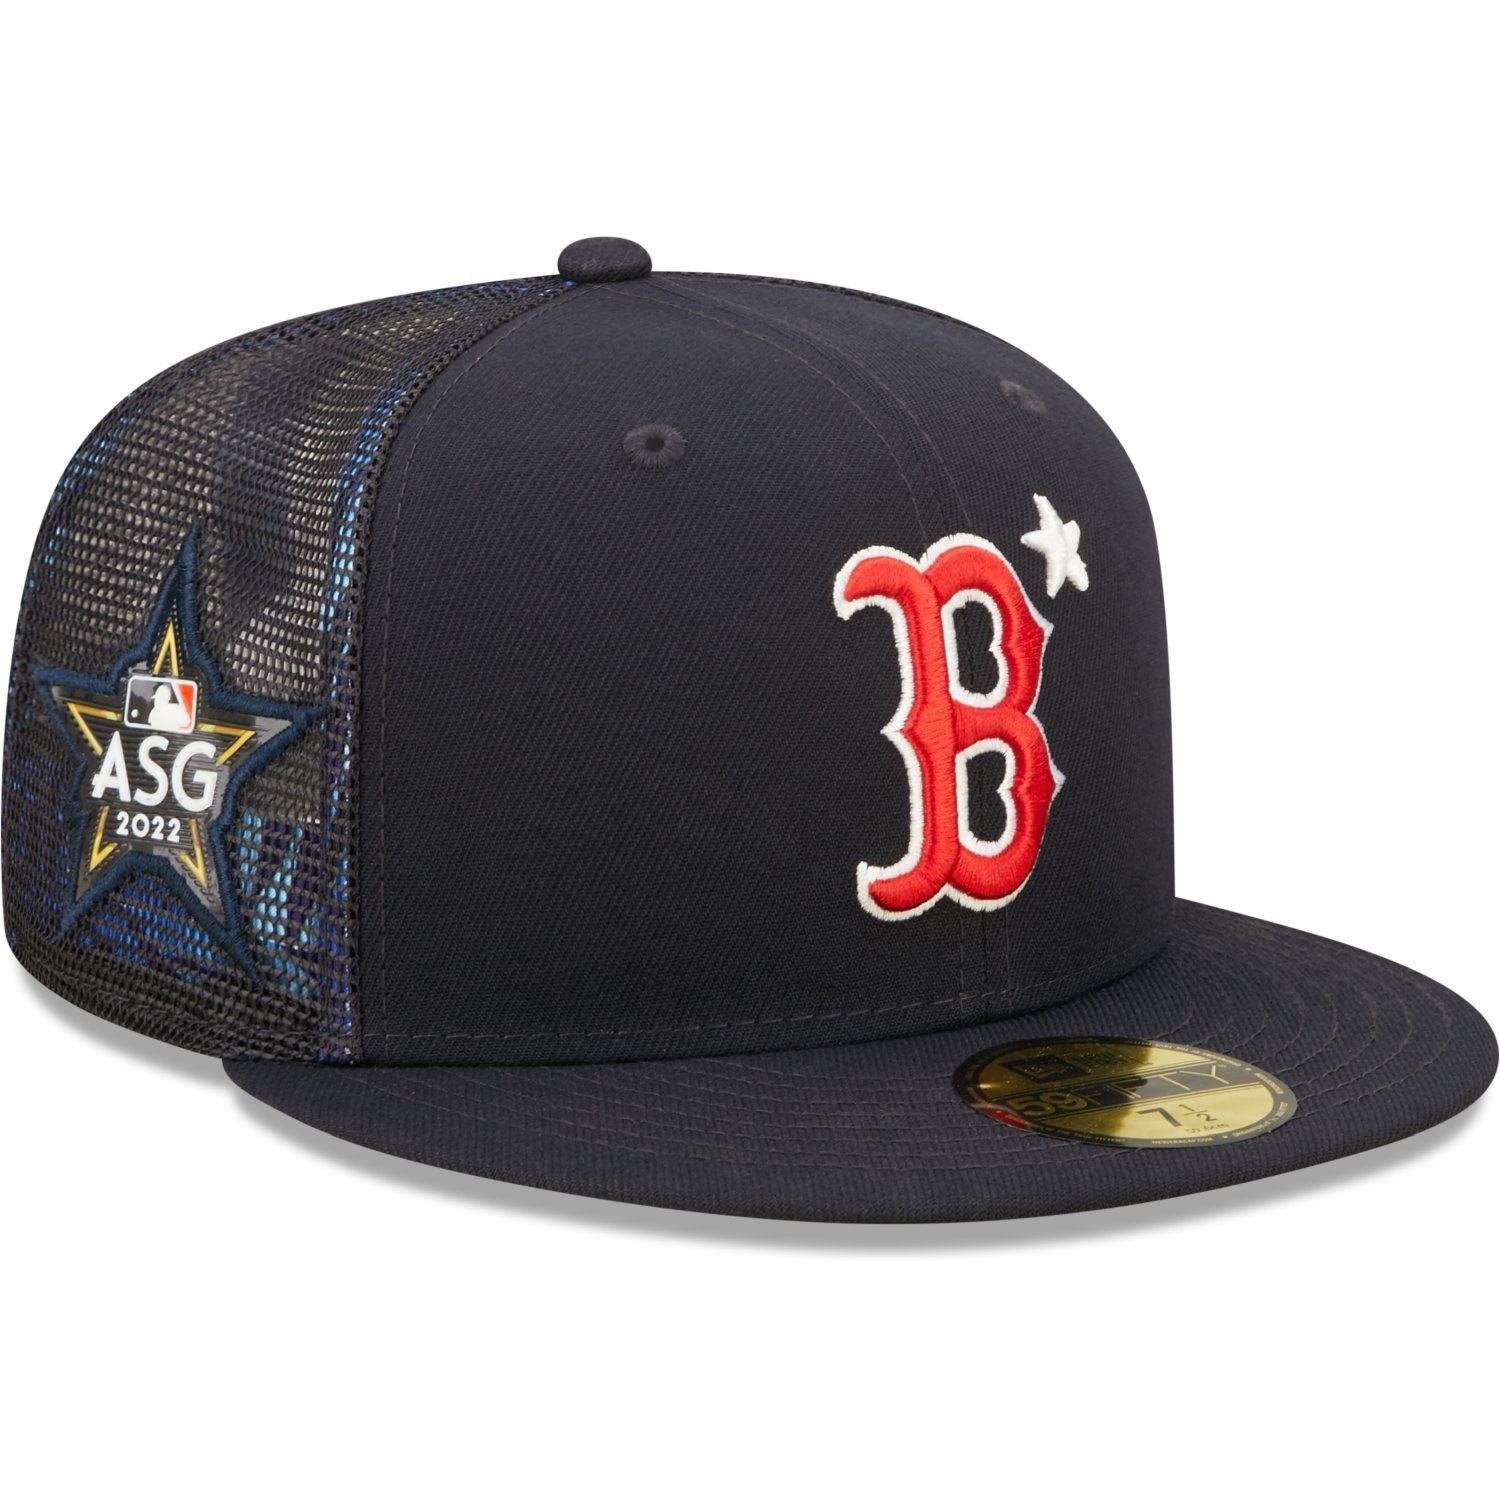 New Era Fitted Cap 59Fifty ALLSTAR GAME Boston Red Sox